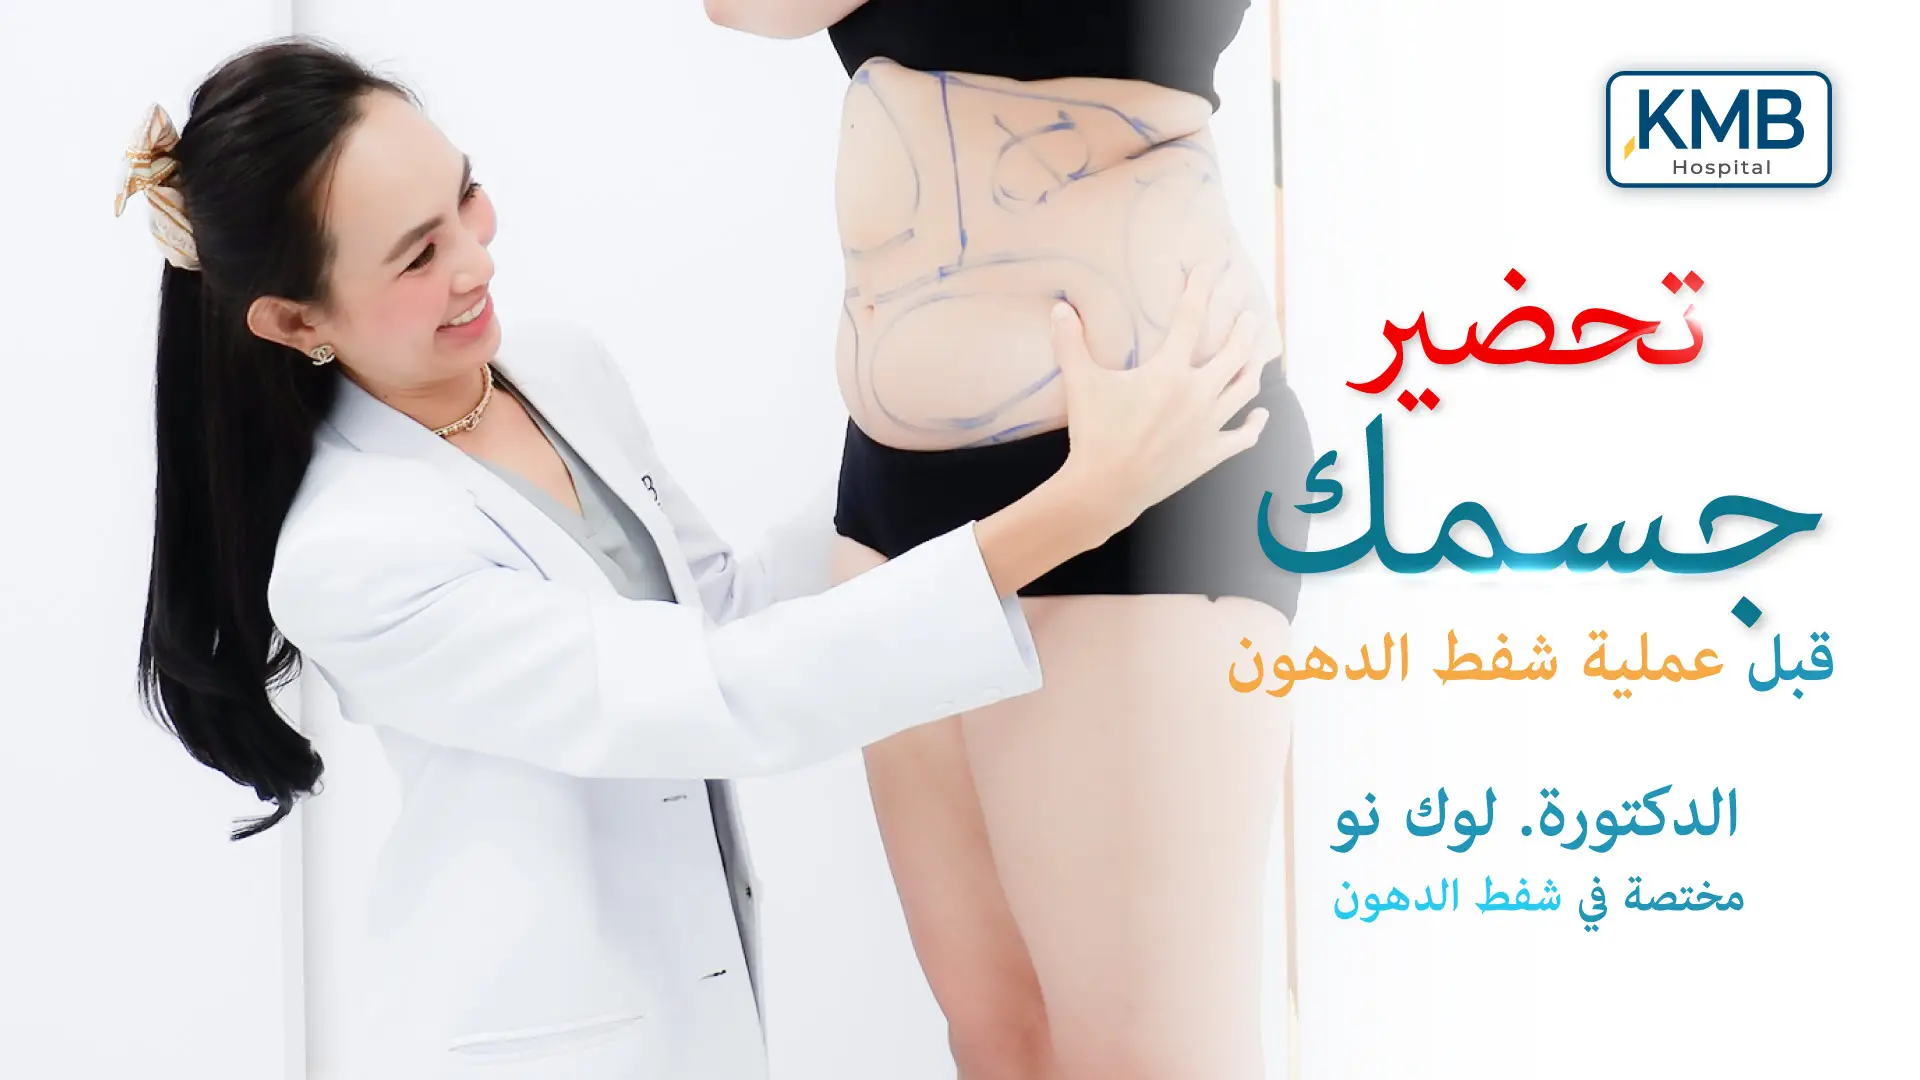 Preparations before liposuction to get a beautiful and perfect body with Dr. Look no